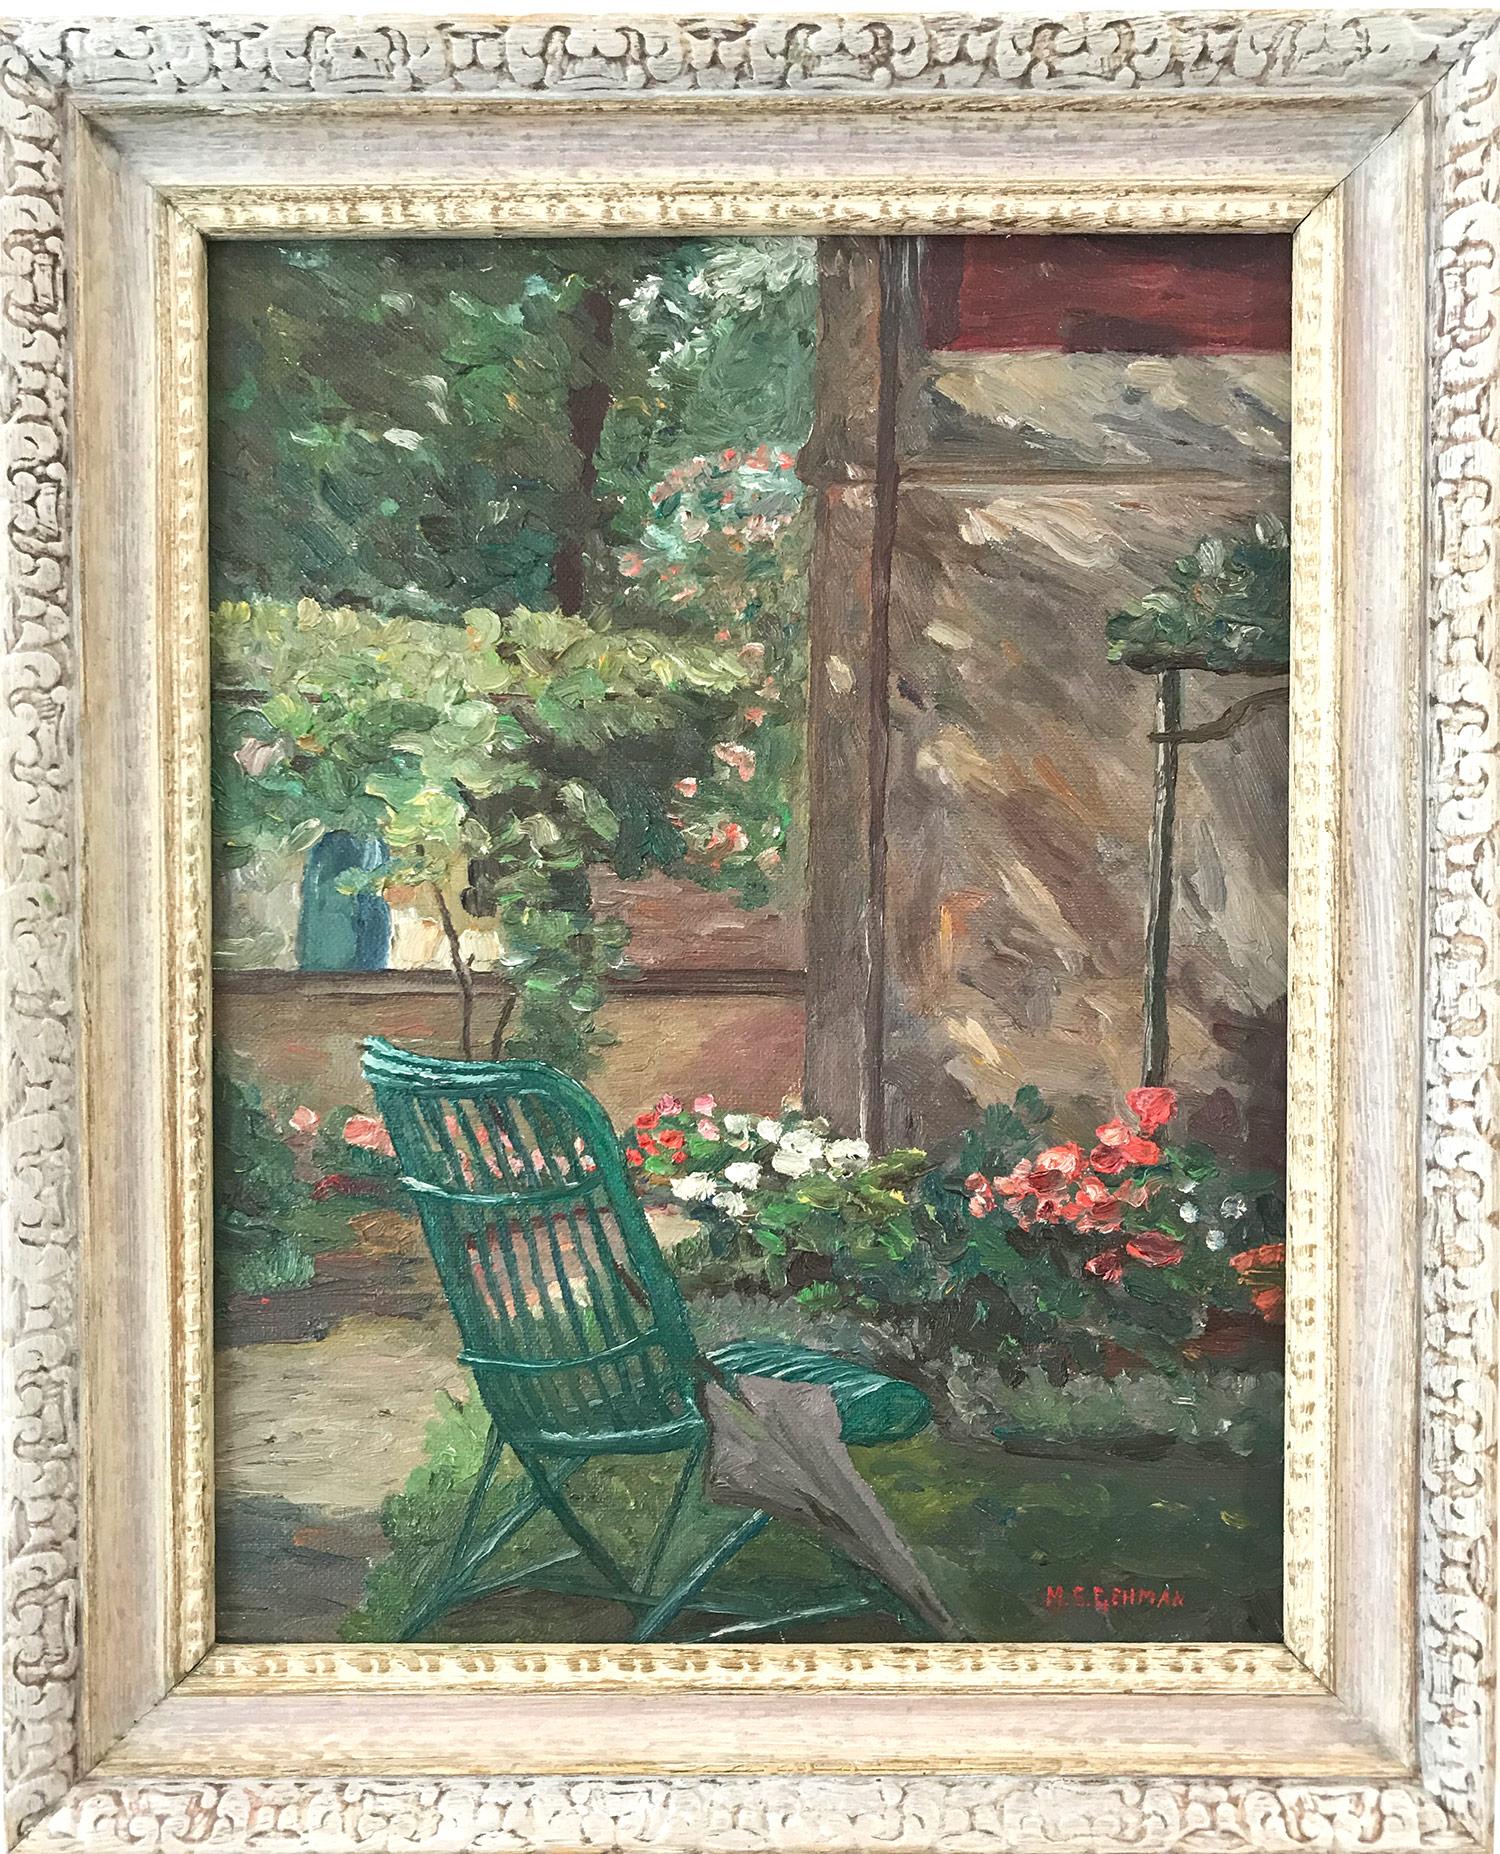 Mildred S. Gehman Landscape Painting - "Garden Scene with Flowers" American Impressionist Oil Painting on Canvasboard